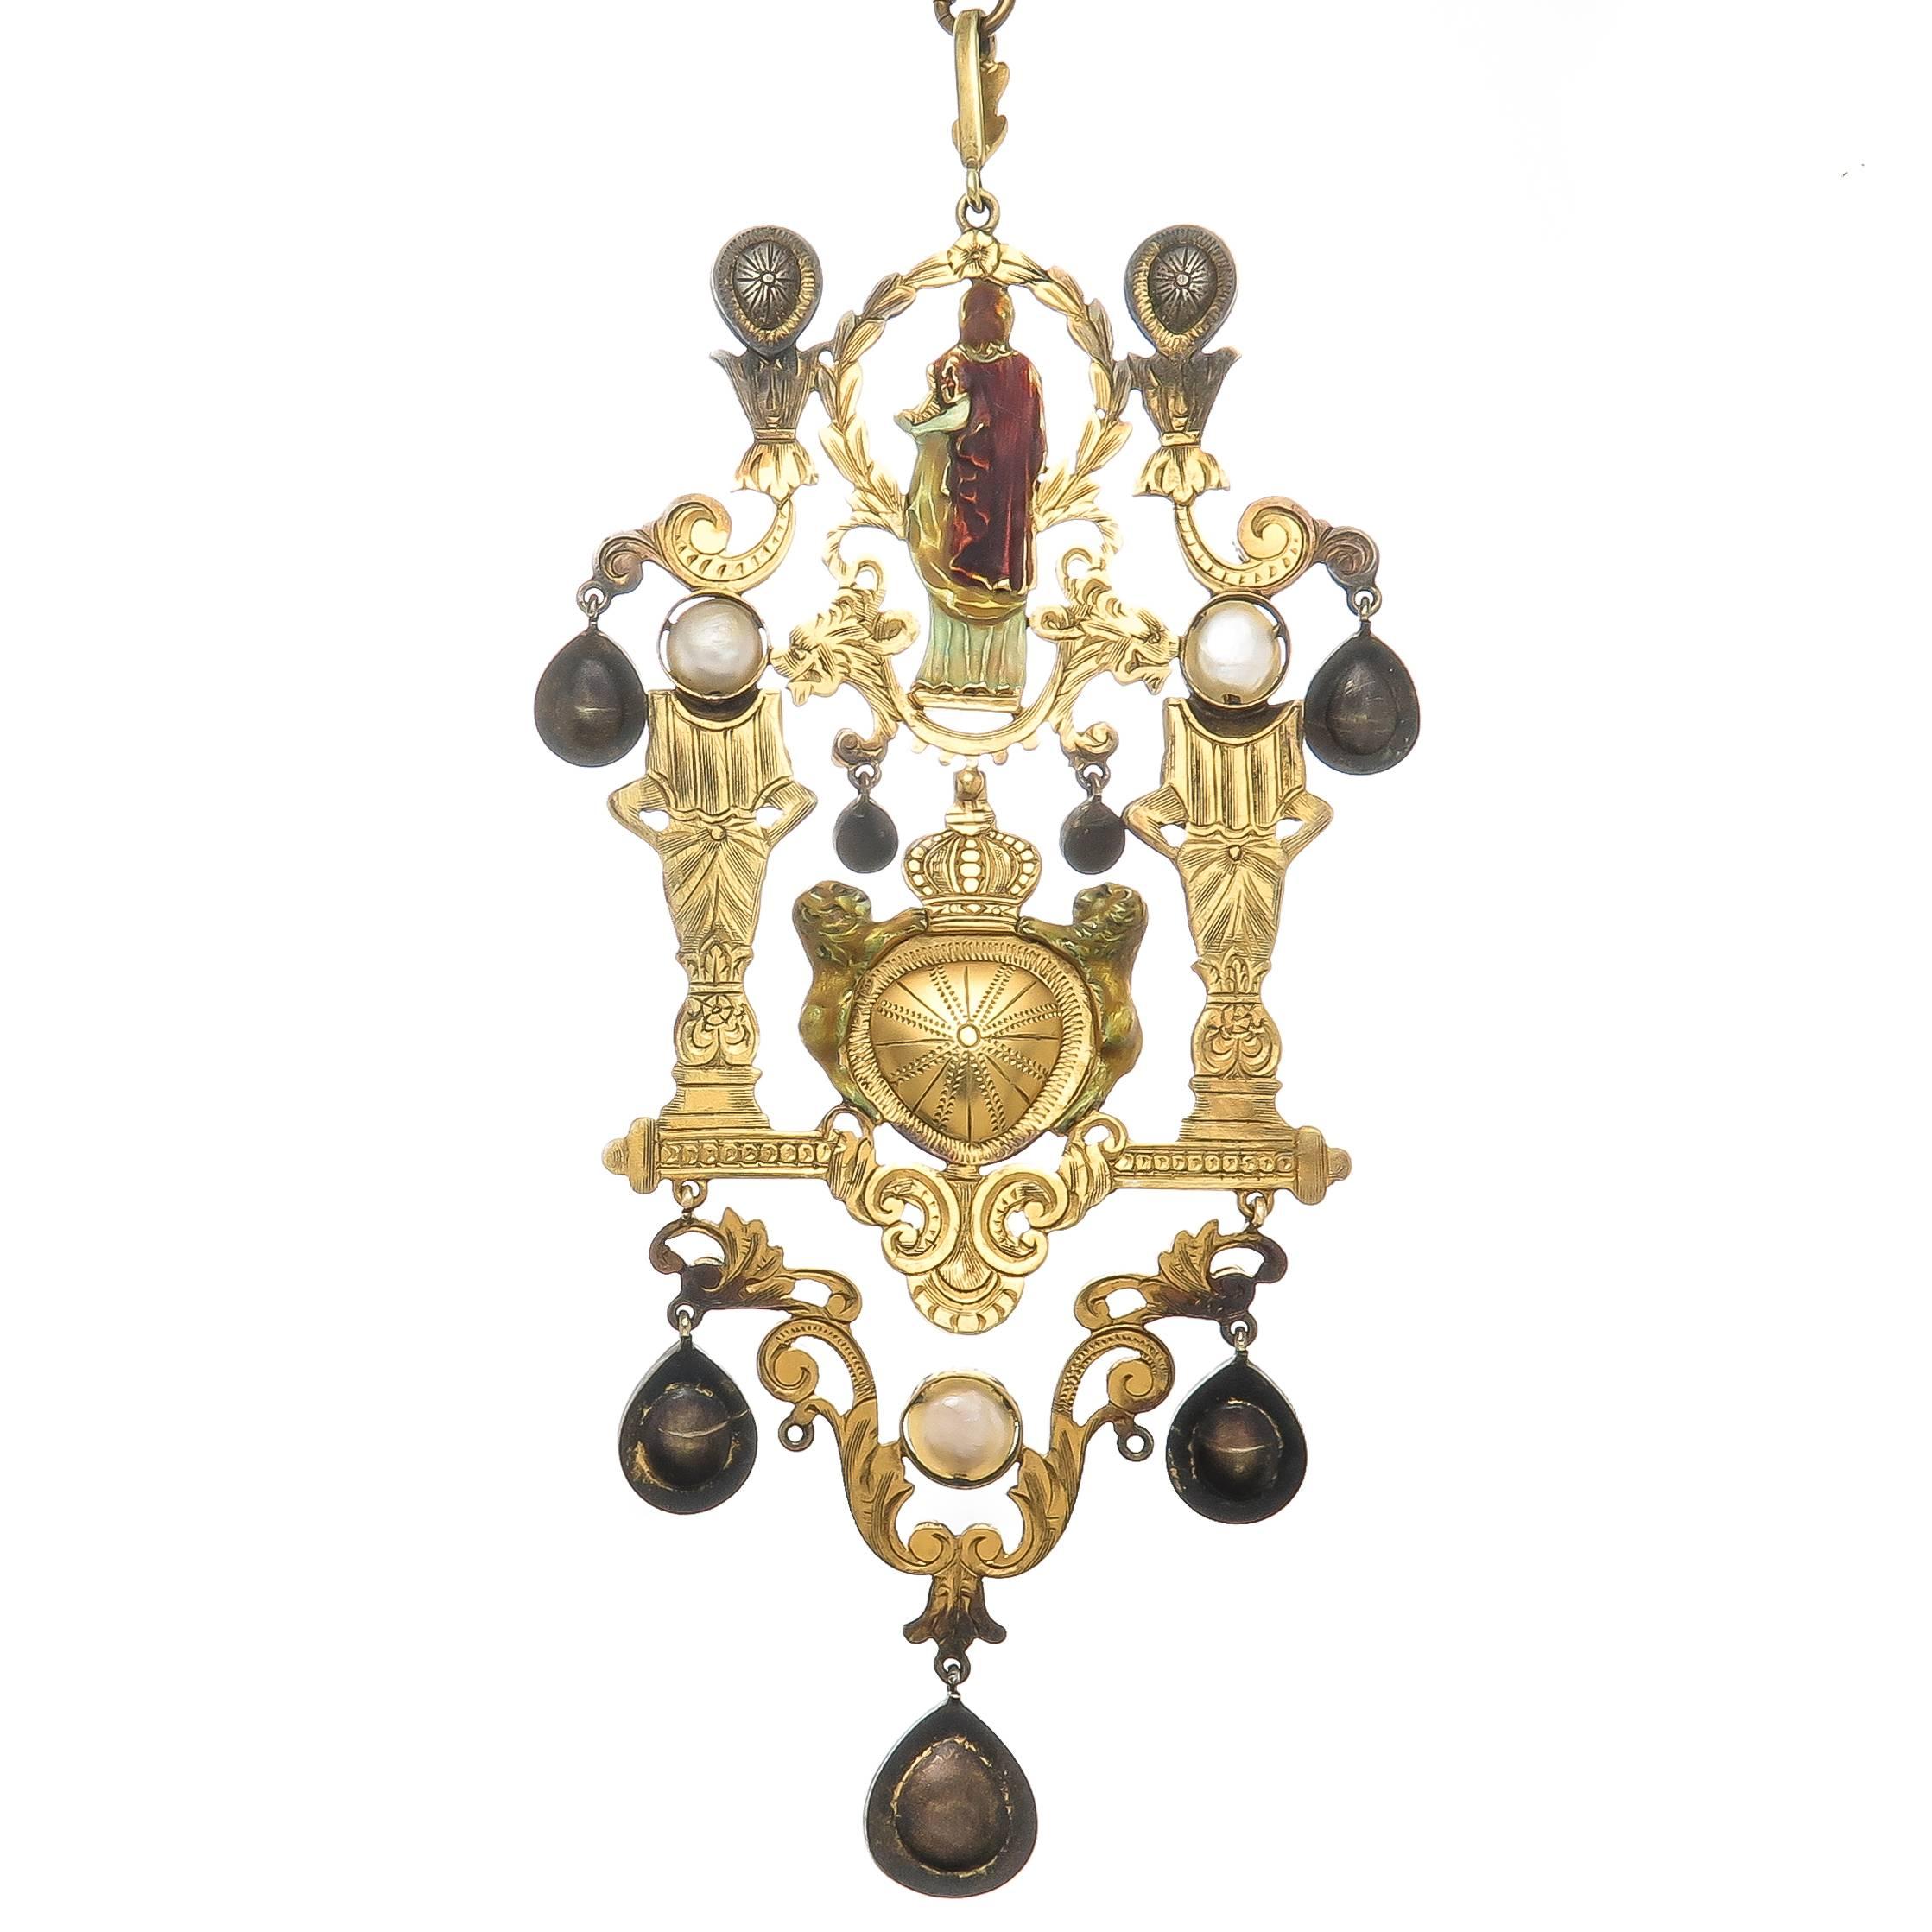 Circa 1890 Victorian Era, Gothic revival Necklace, the pendant element measures 4 5/8 inch in length X 2 1/8 inch wide and is suspended from a 20 inch chain. High Karat Yellow Gold tests as 15 to 18K, finely detailed on the front and back with hand